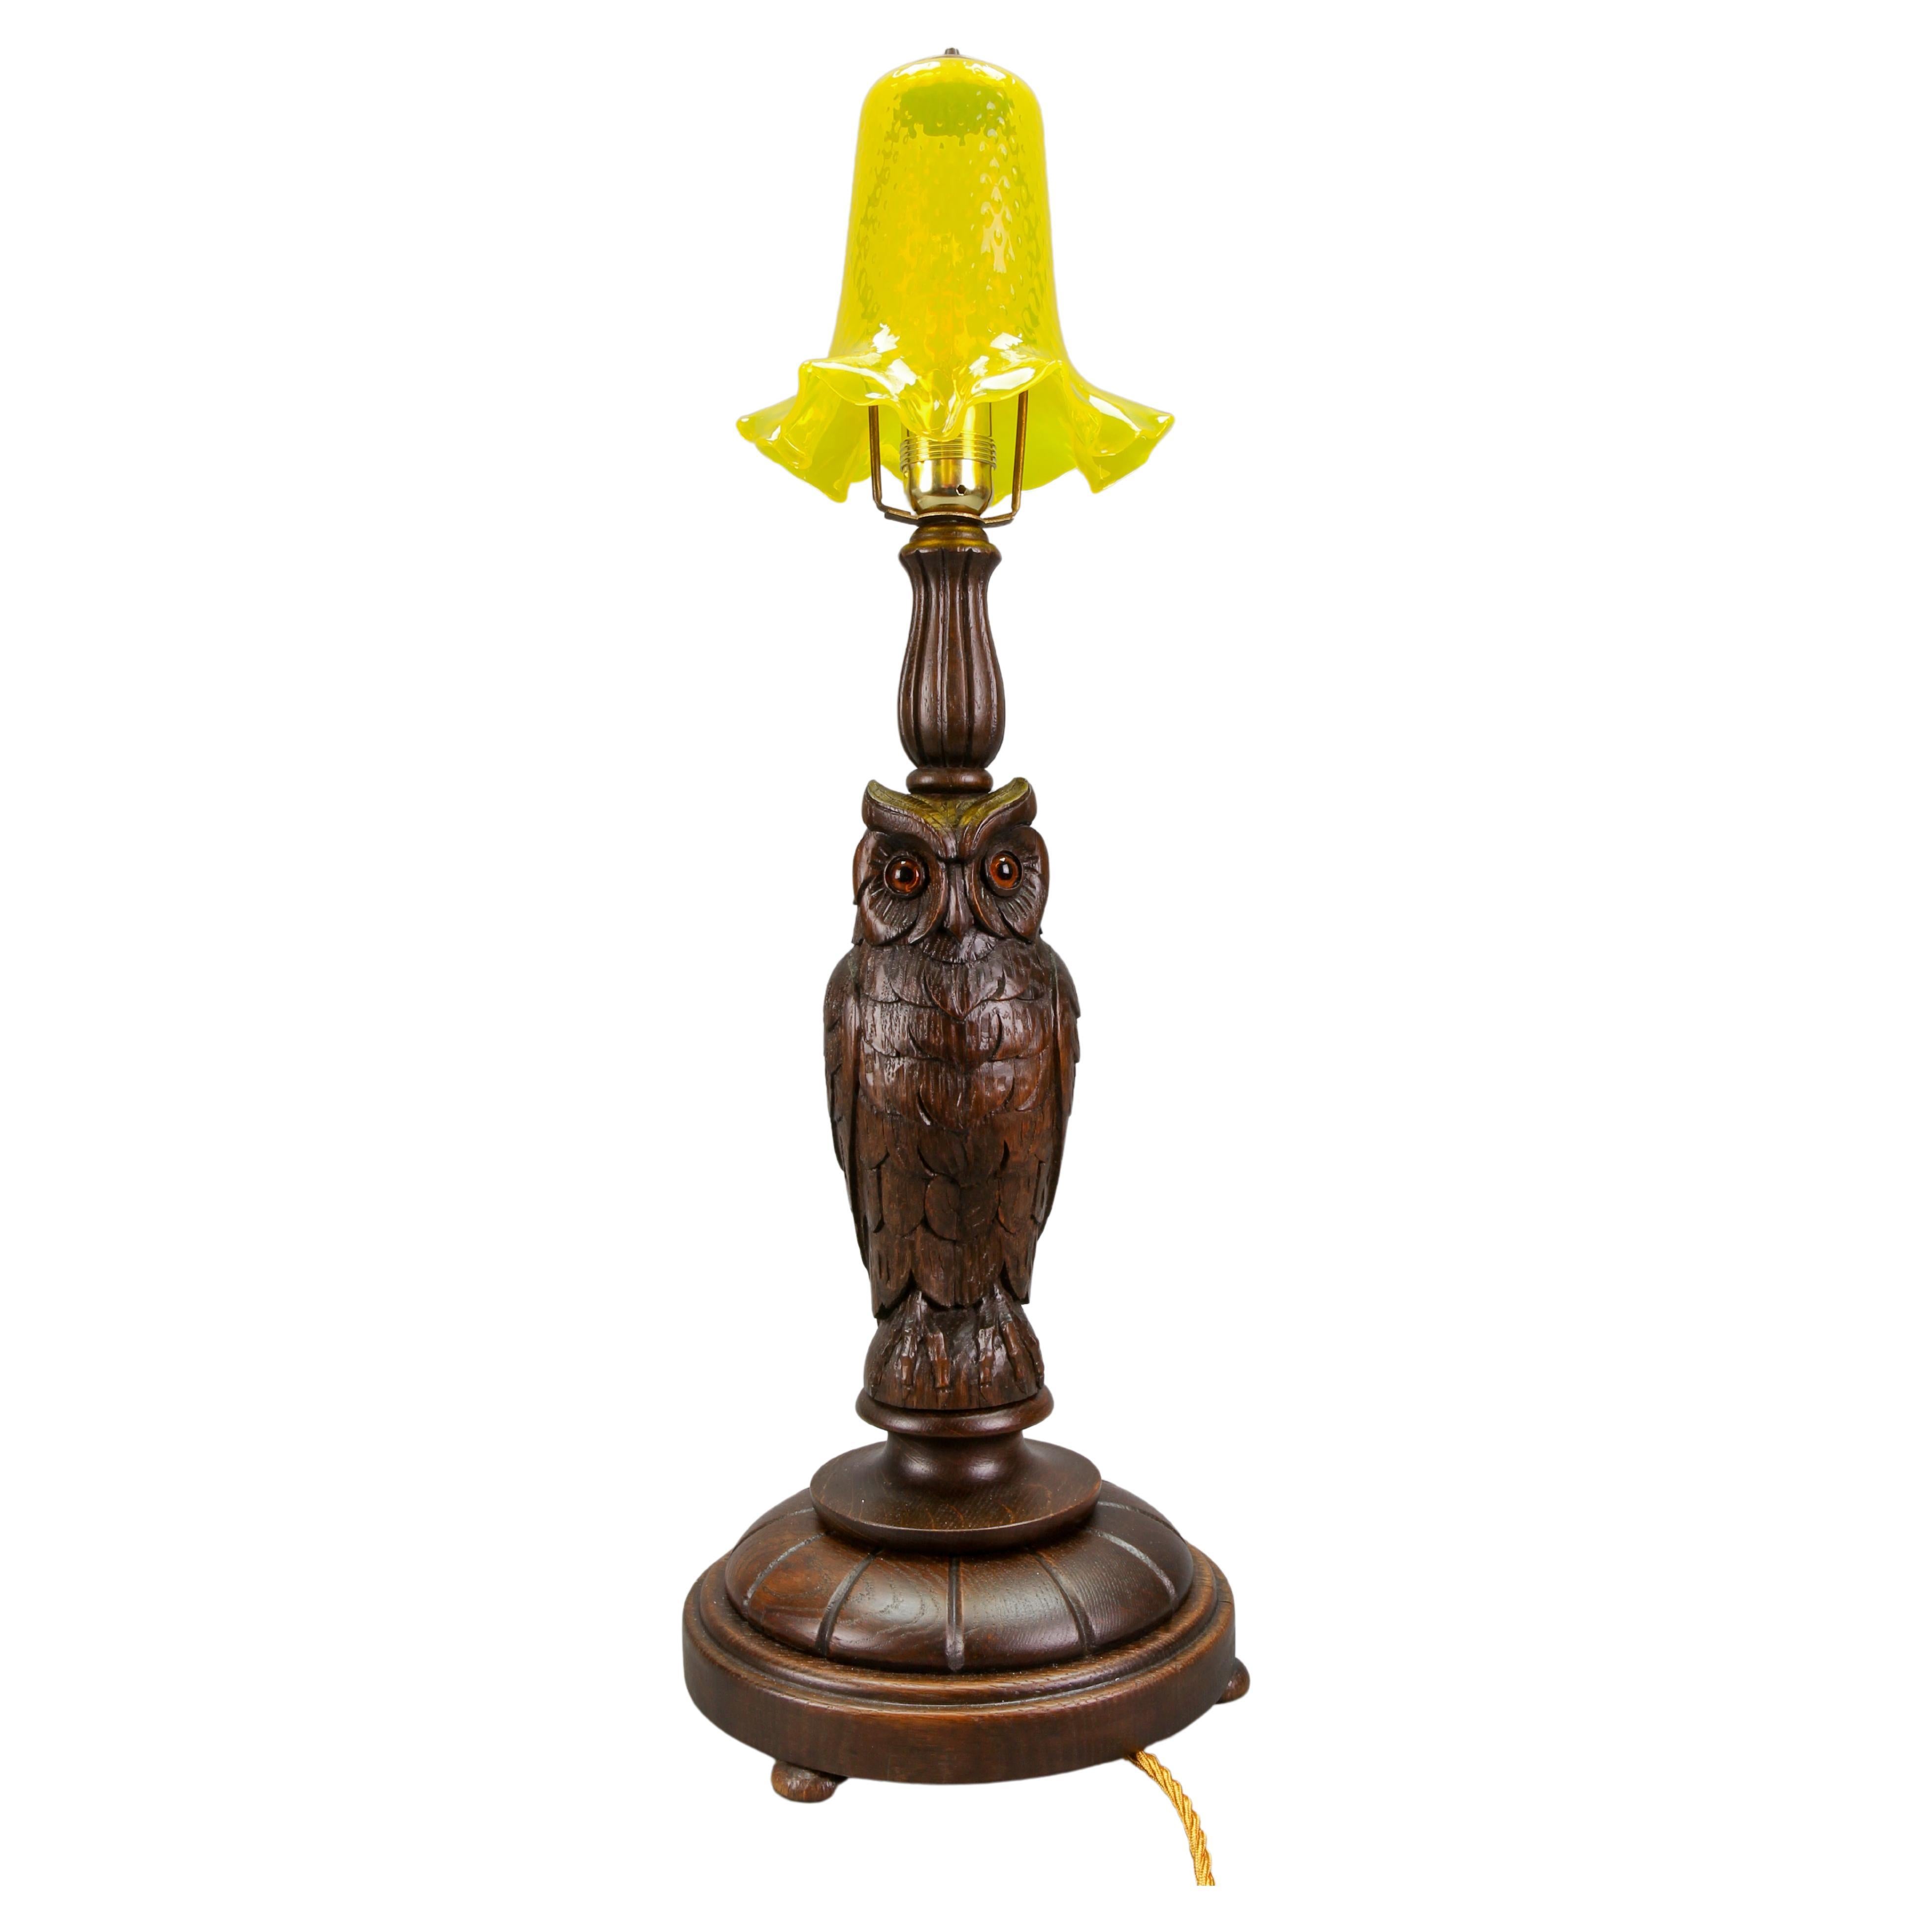 Art Deco Table Lamp with Owl Sculpture and Yellow Glass Lampshade, ca. 1920